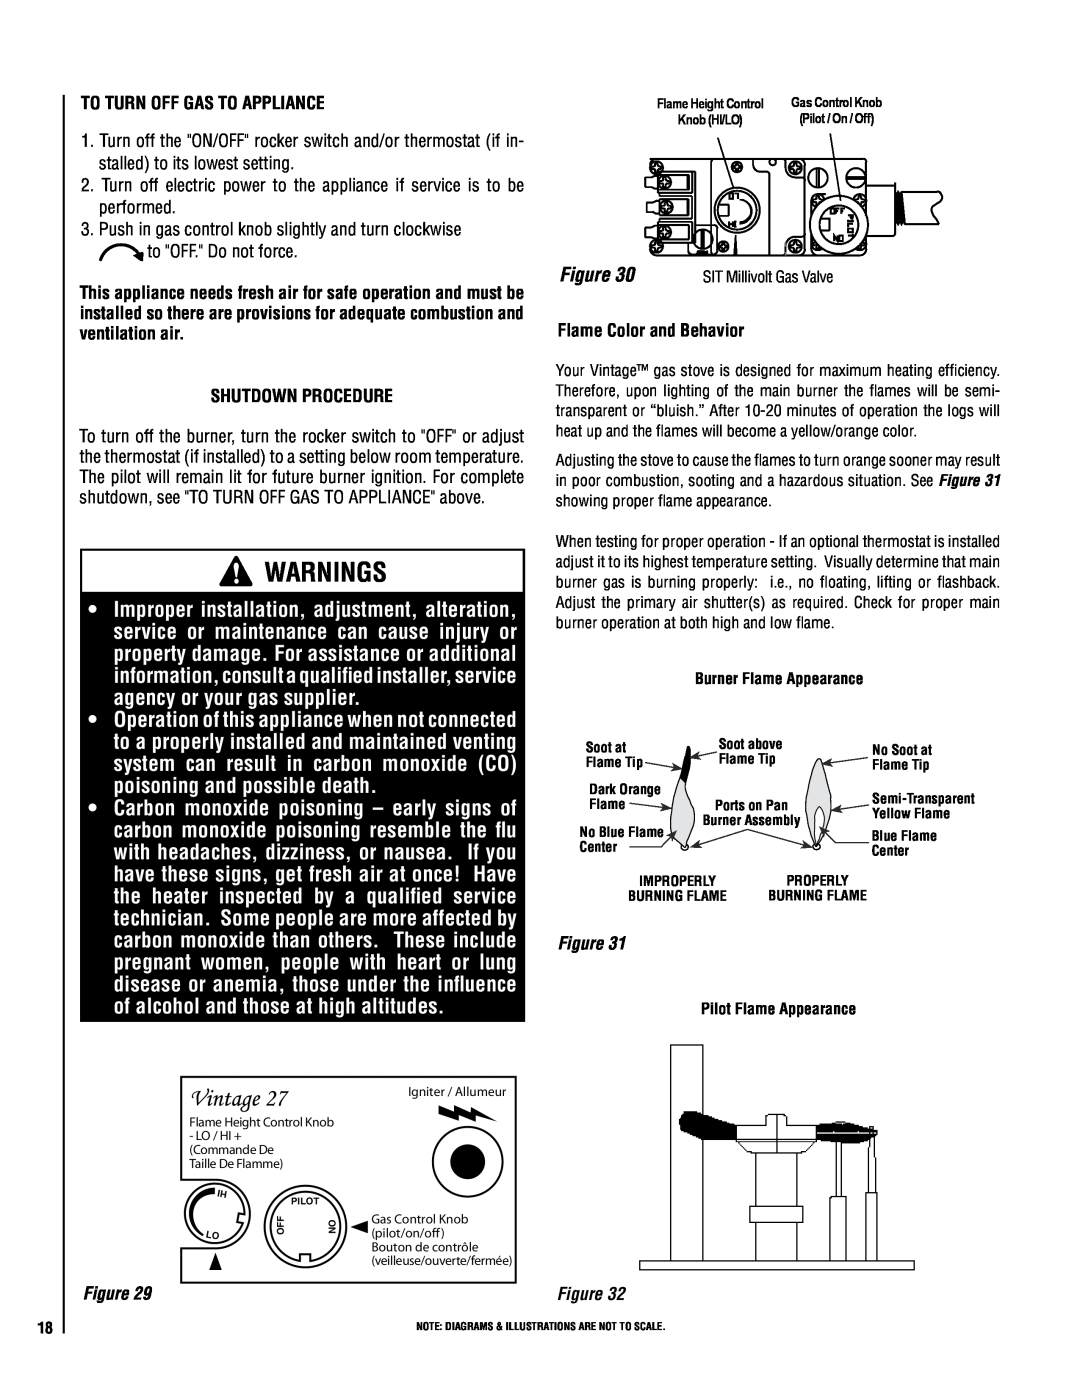 Lennox Hearth VIN operation manual Warnings, To Turn Off Gas To Appliance, Shutdown Procedure, Flame Color and Behavior 